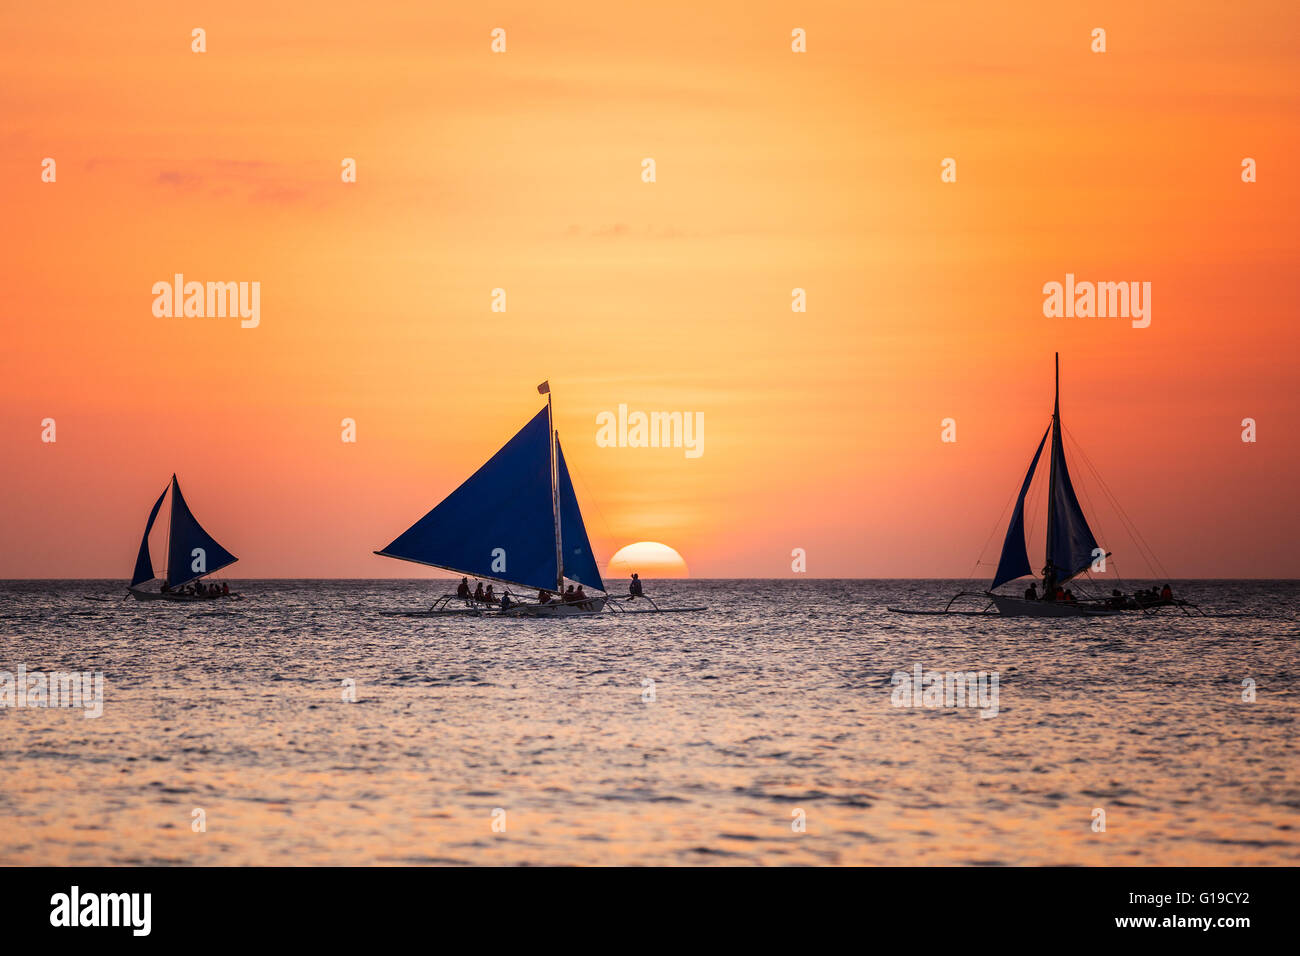 Sunset seascape with a sailboat Stock Photo